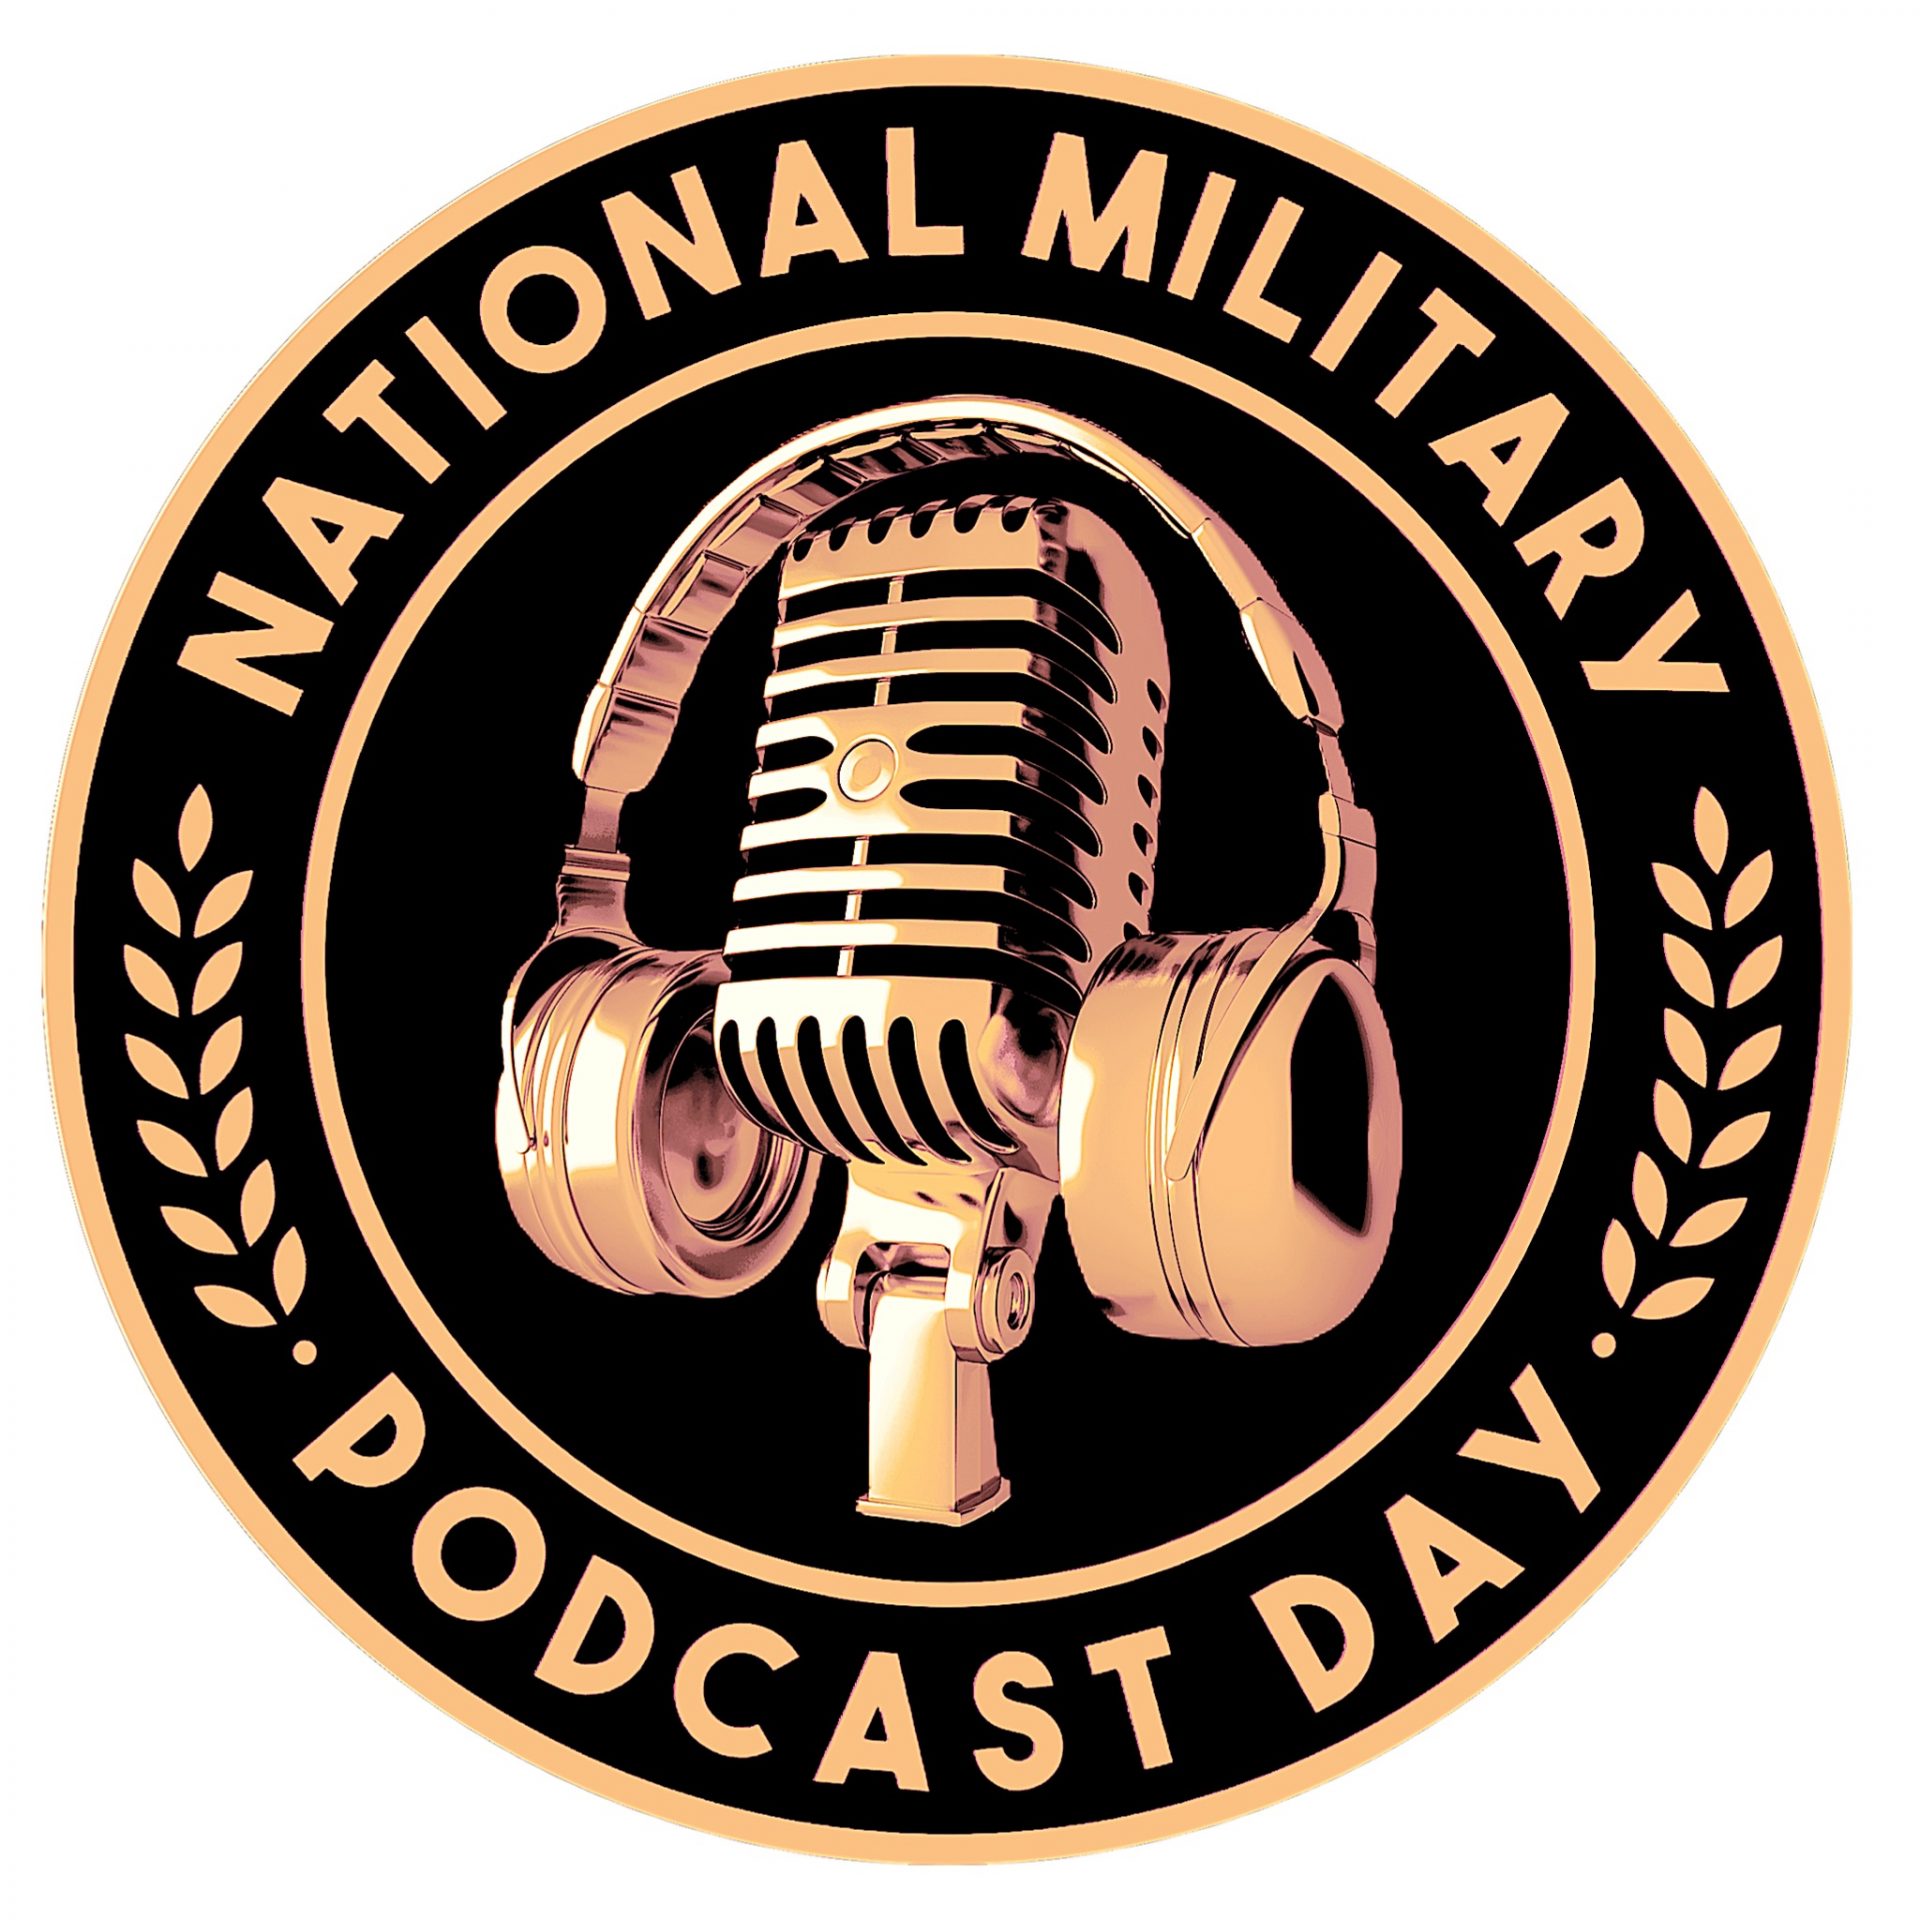 National Military Podcast Day